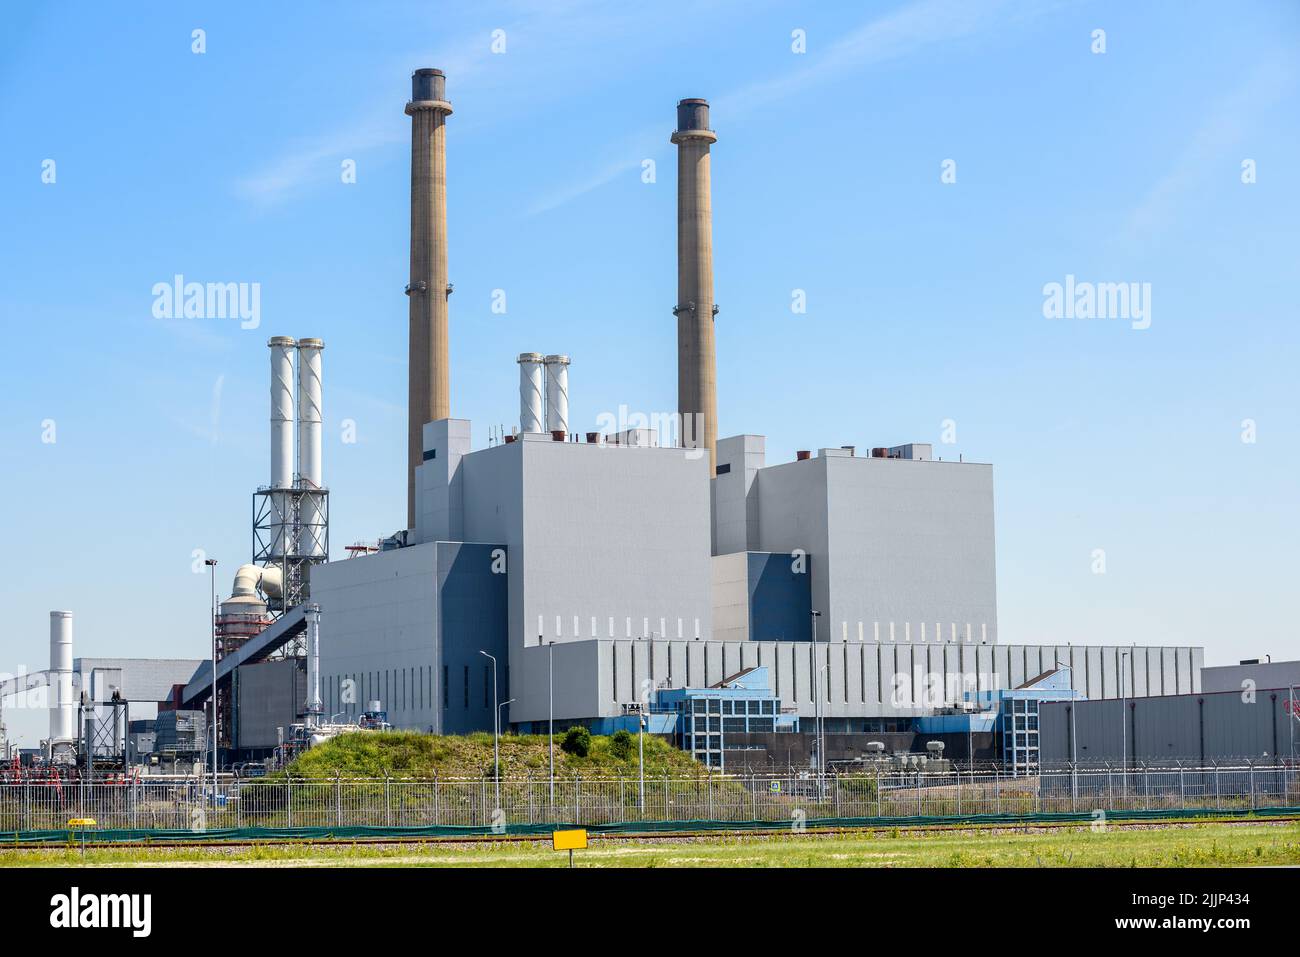 View of a coal-fired power plant under blue sky on a sunny summer day Stock Photo